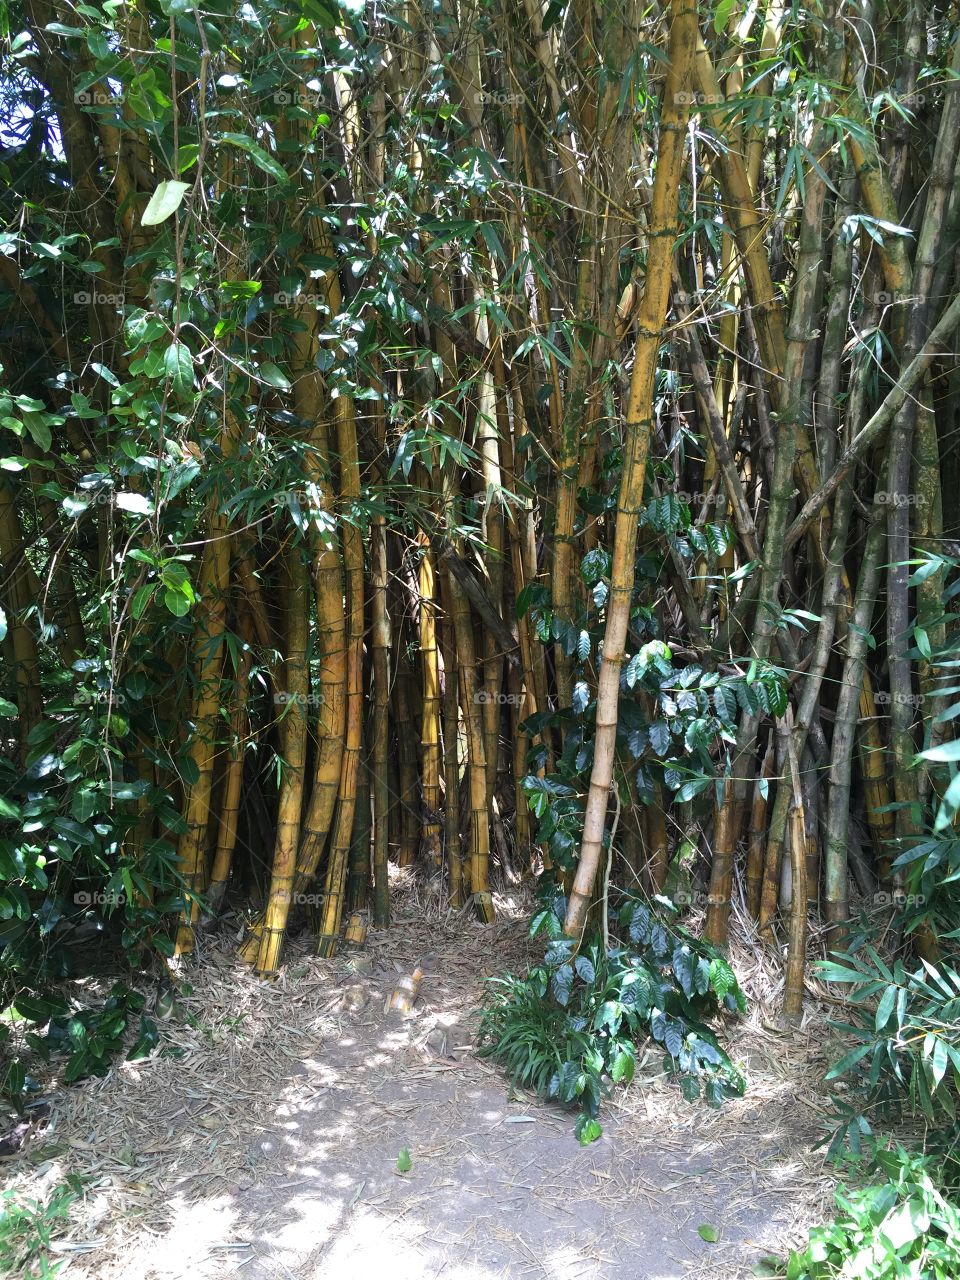 Bamboo in the jungle